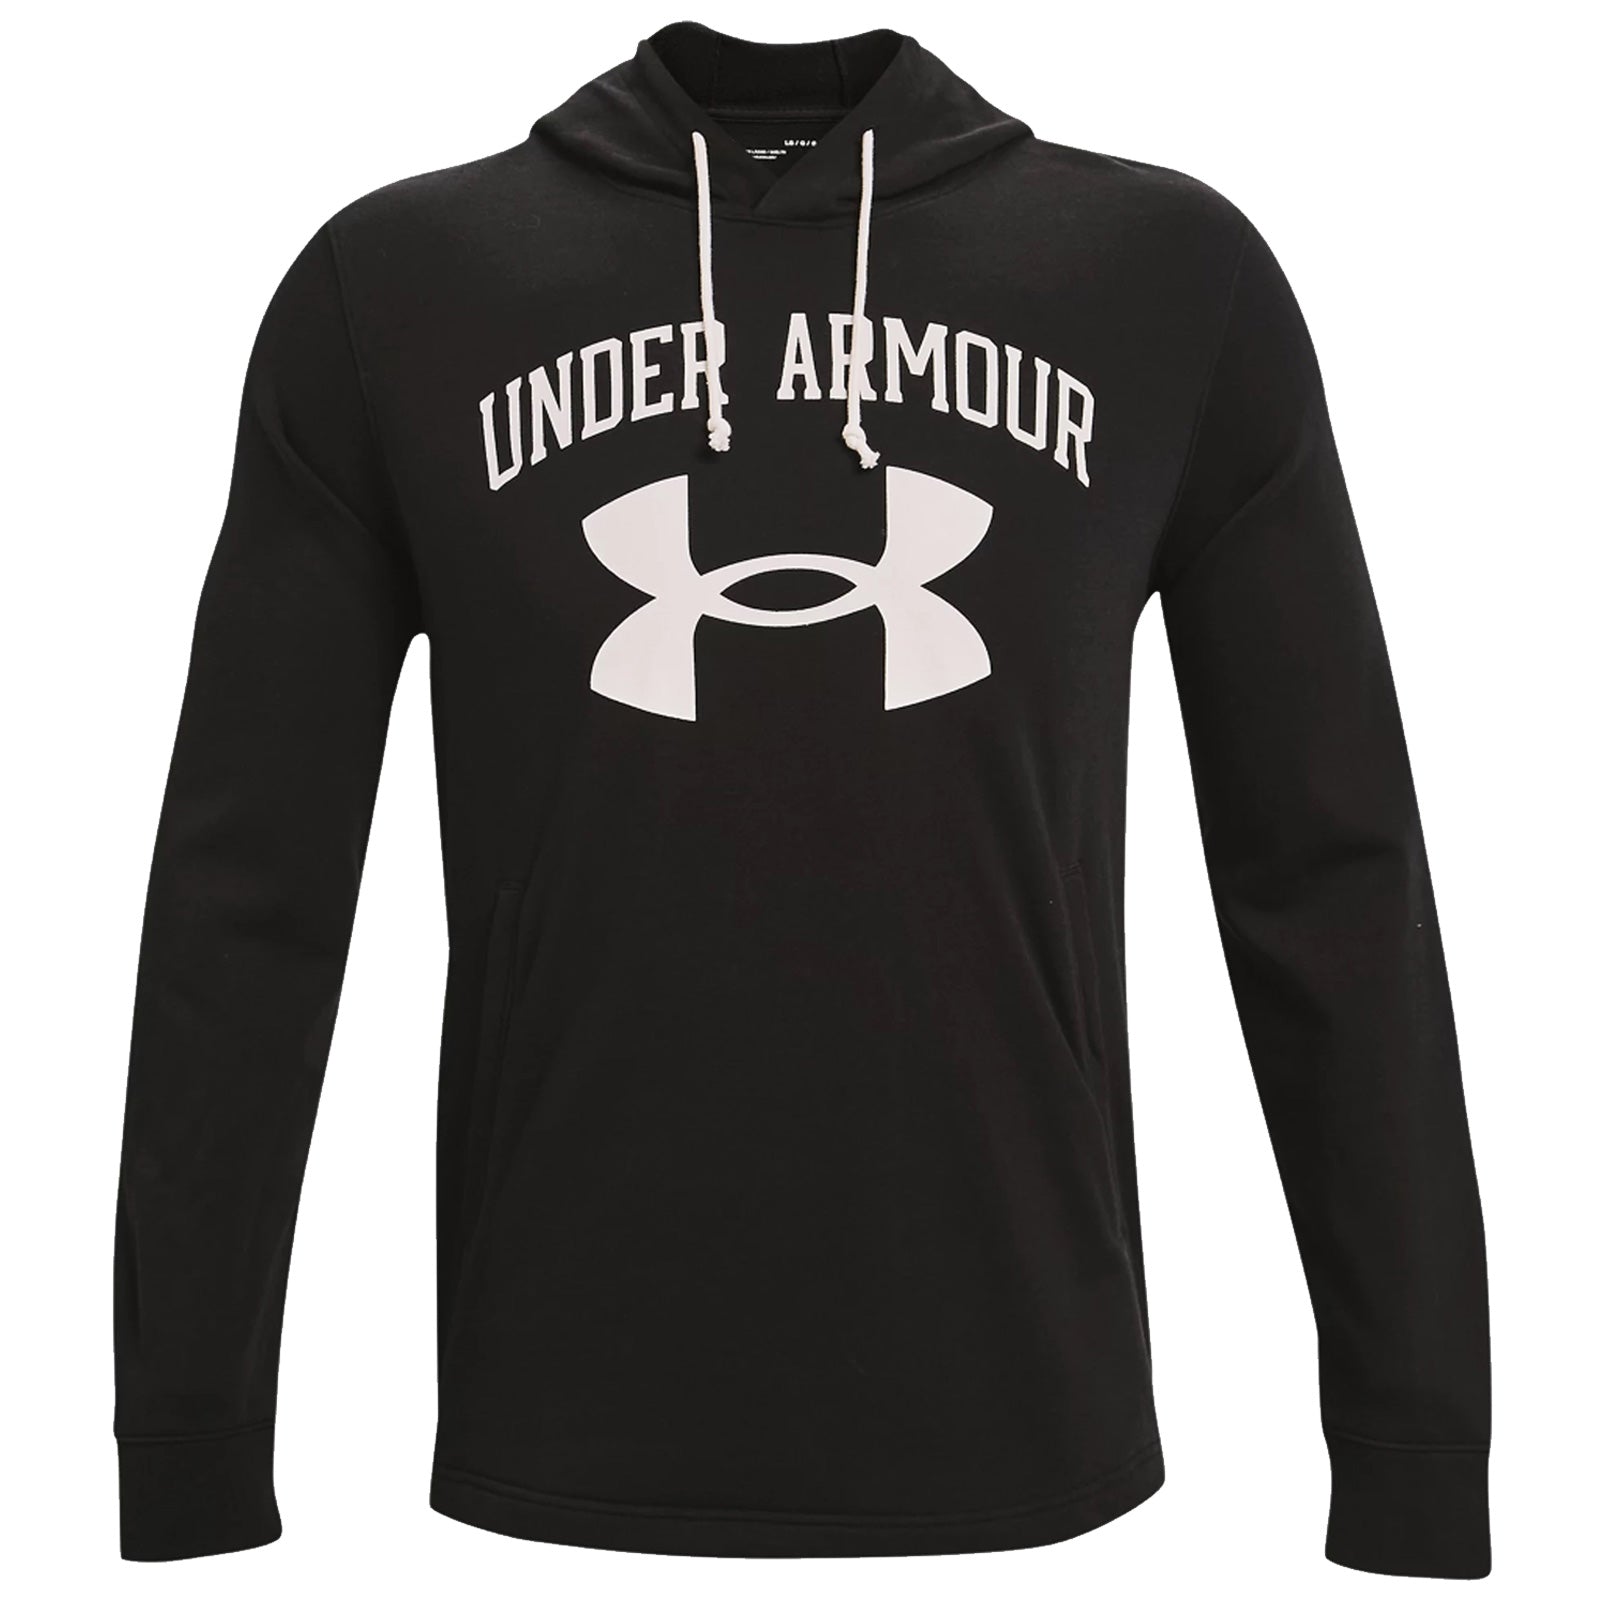 Under Armour Mens Rival Terry Big Logo Hoodie